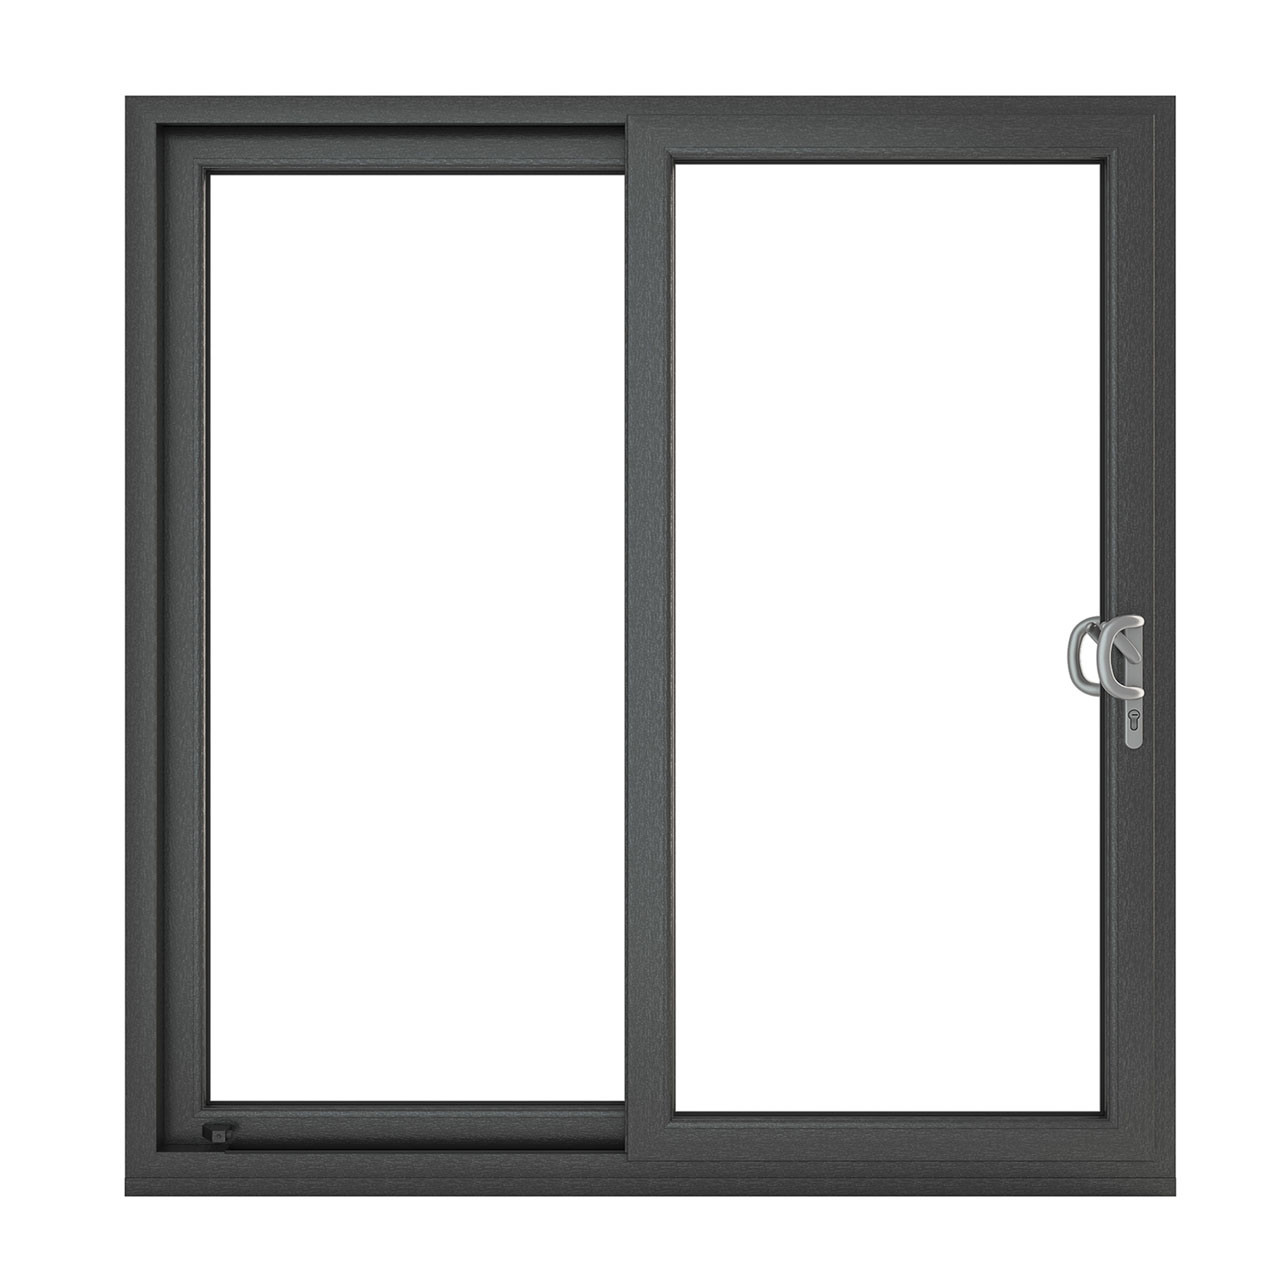 Photograph of Crystal uPVC Grey 7016 External White Internal Sliding Patio Right to Left 150mm Cill Included 1490mm x 2090mm Clear Glazing